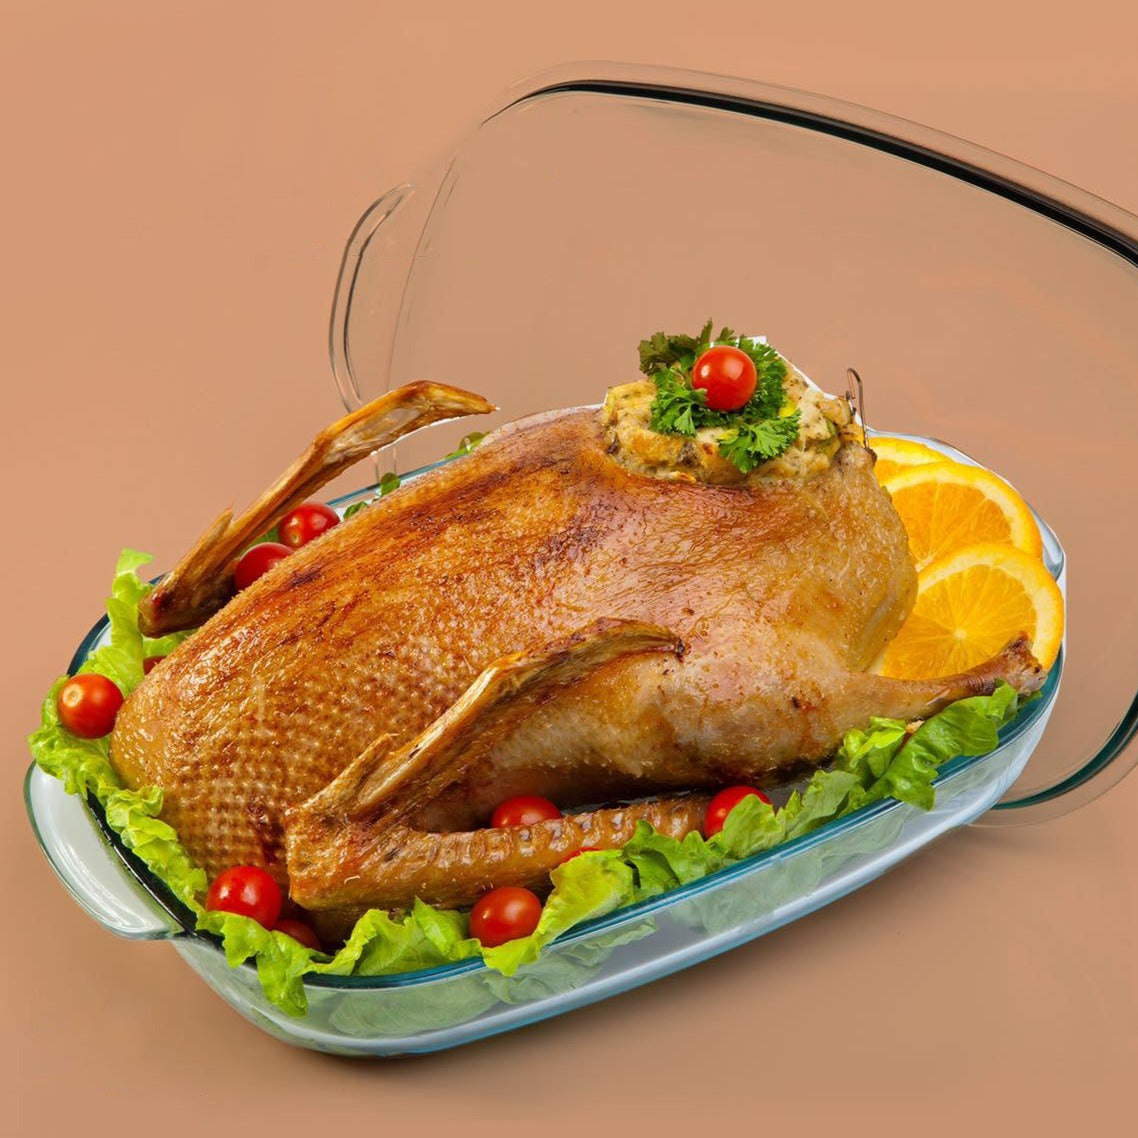 Verrez - Rectangular Glass Roaster With Cover  - Tempered Glass - 26x22x14cm  - 770001133